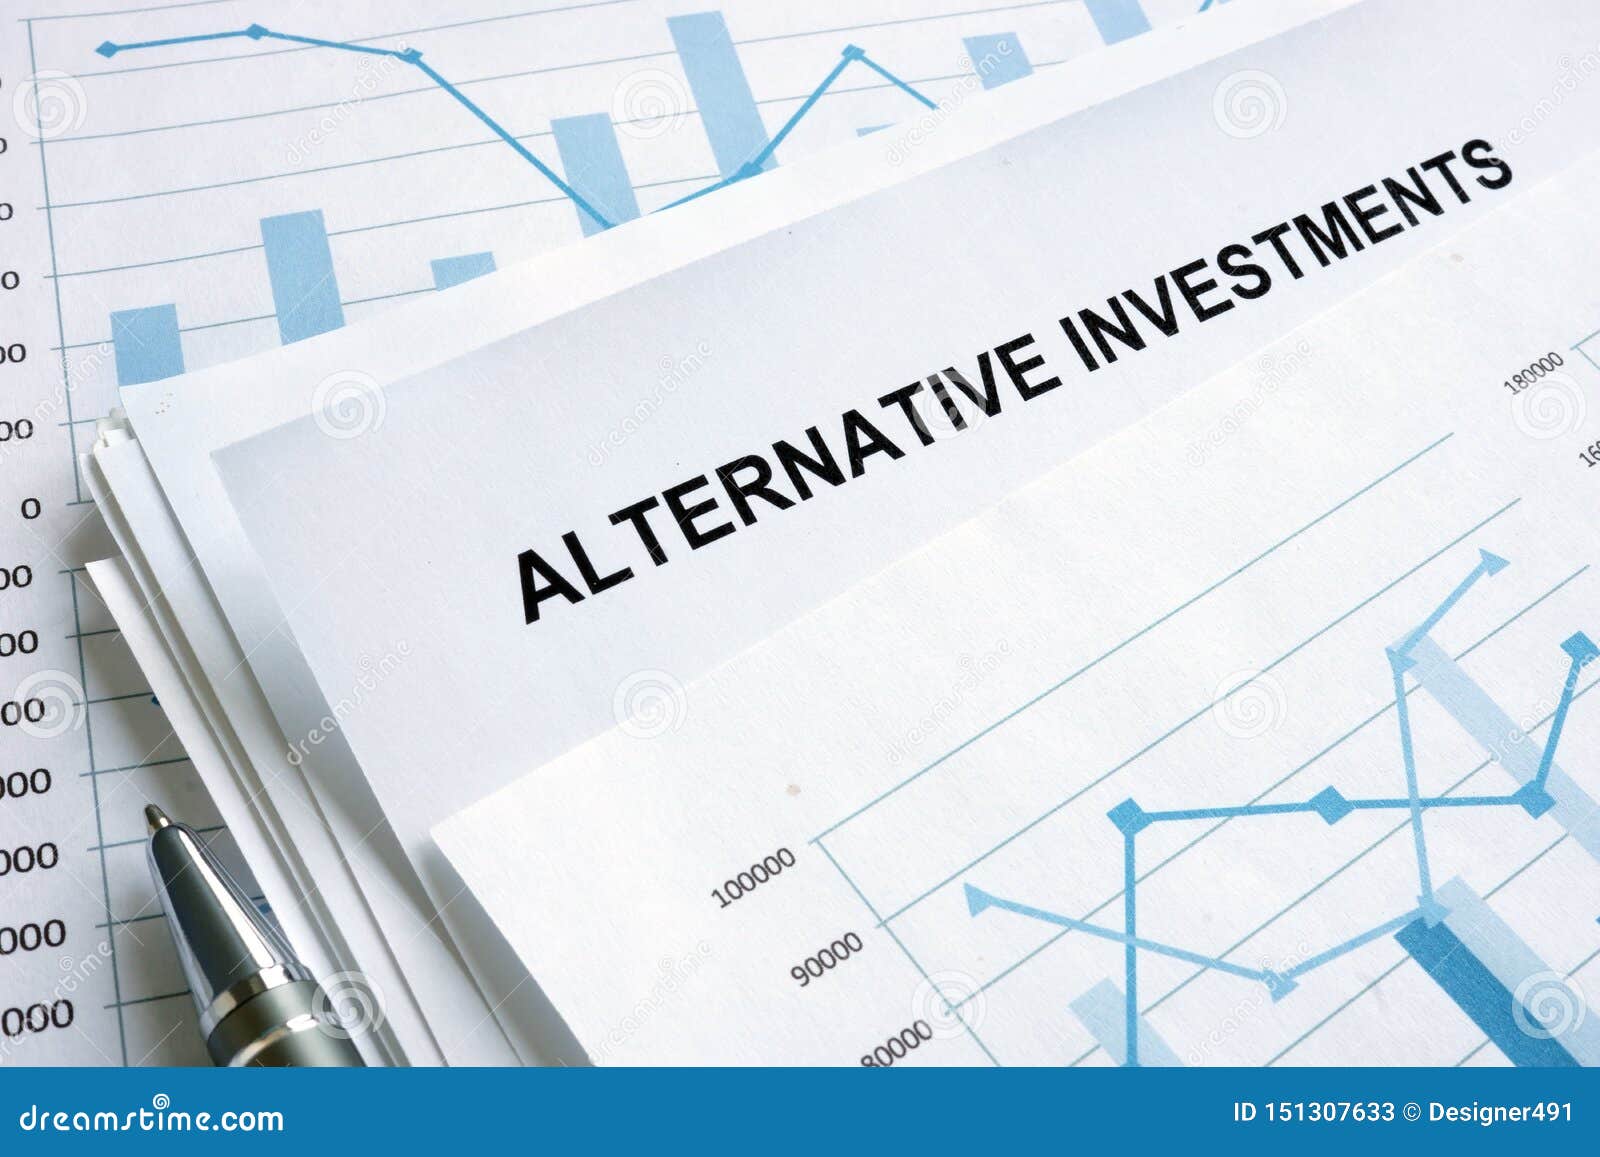 documents about alternative investments with financial charts